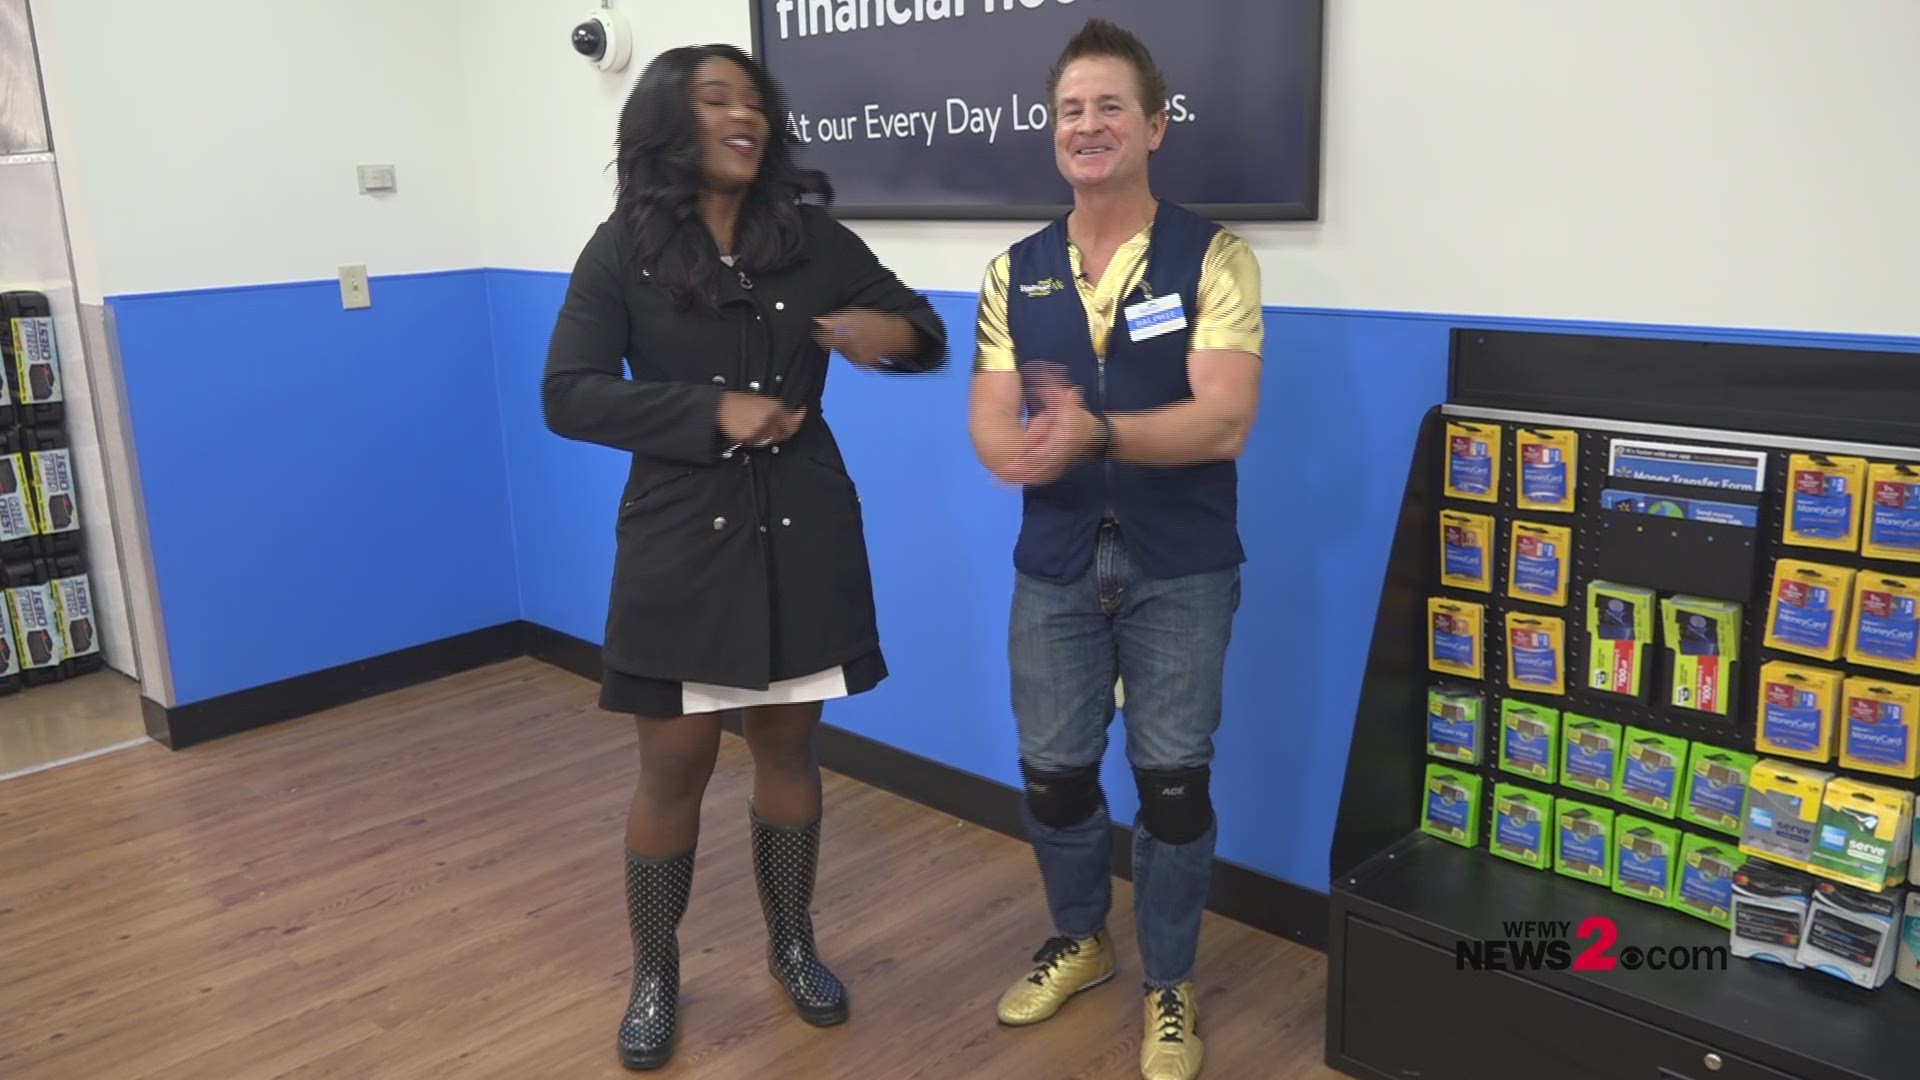 Taheshah turns up the moves learning the Walmart Shuffle straight from the pros